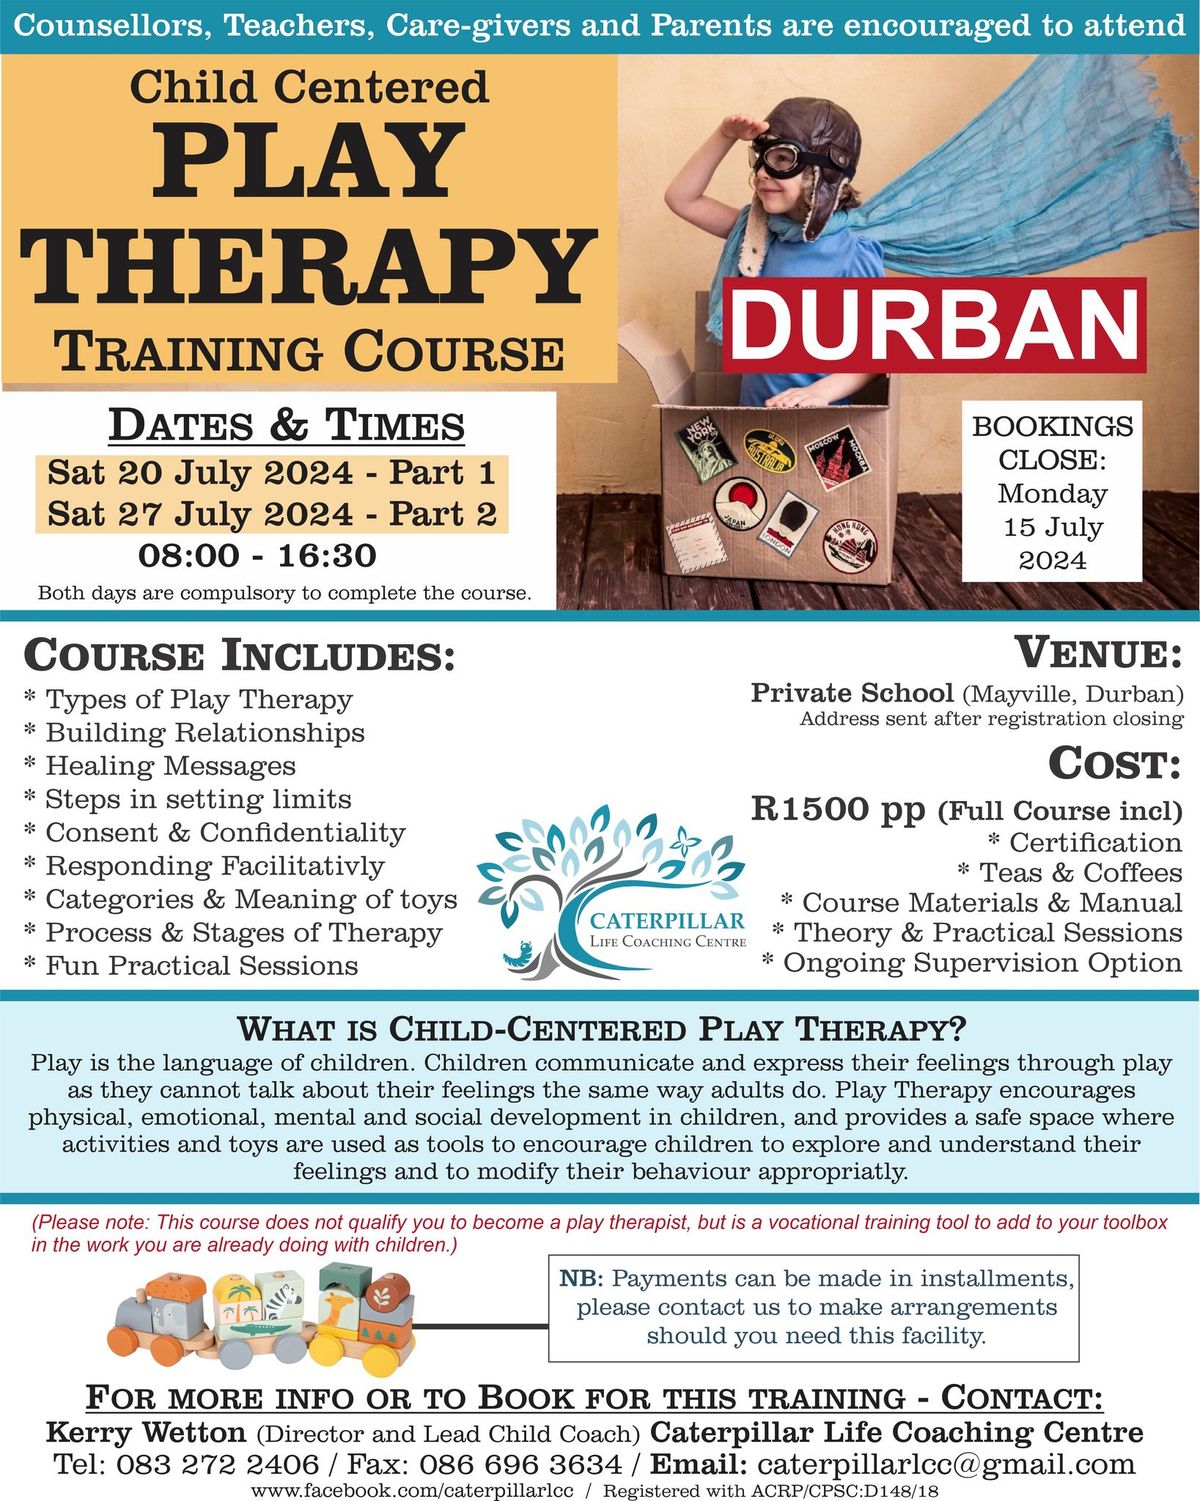 CHILD CENTERED PLAY THERAPY TRAINING COURSE